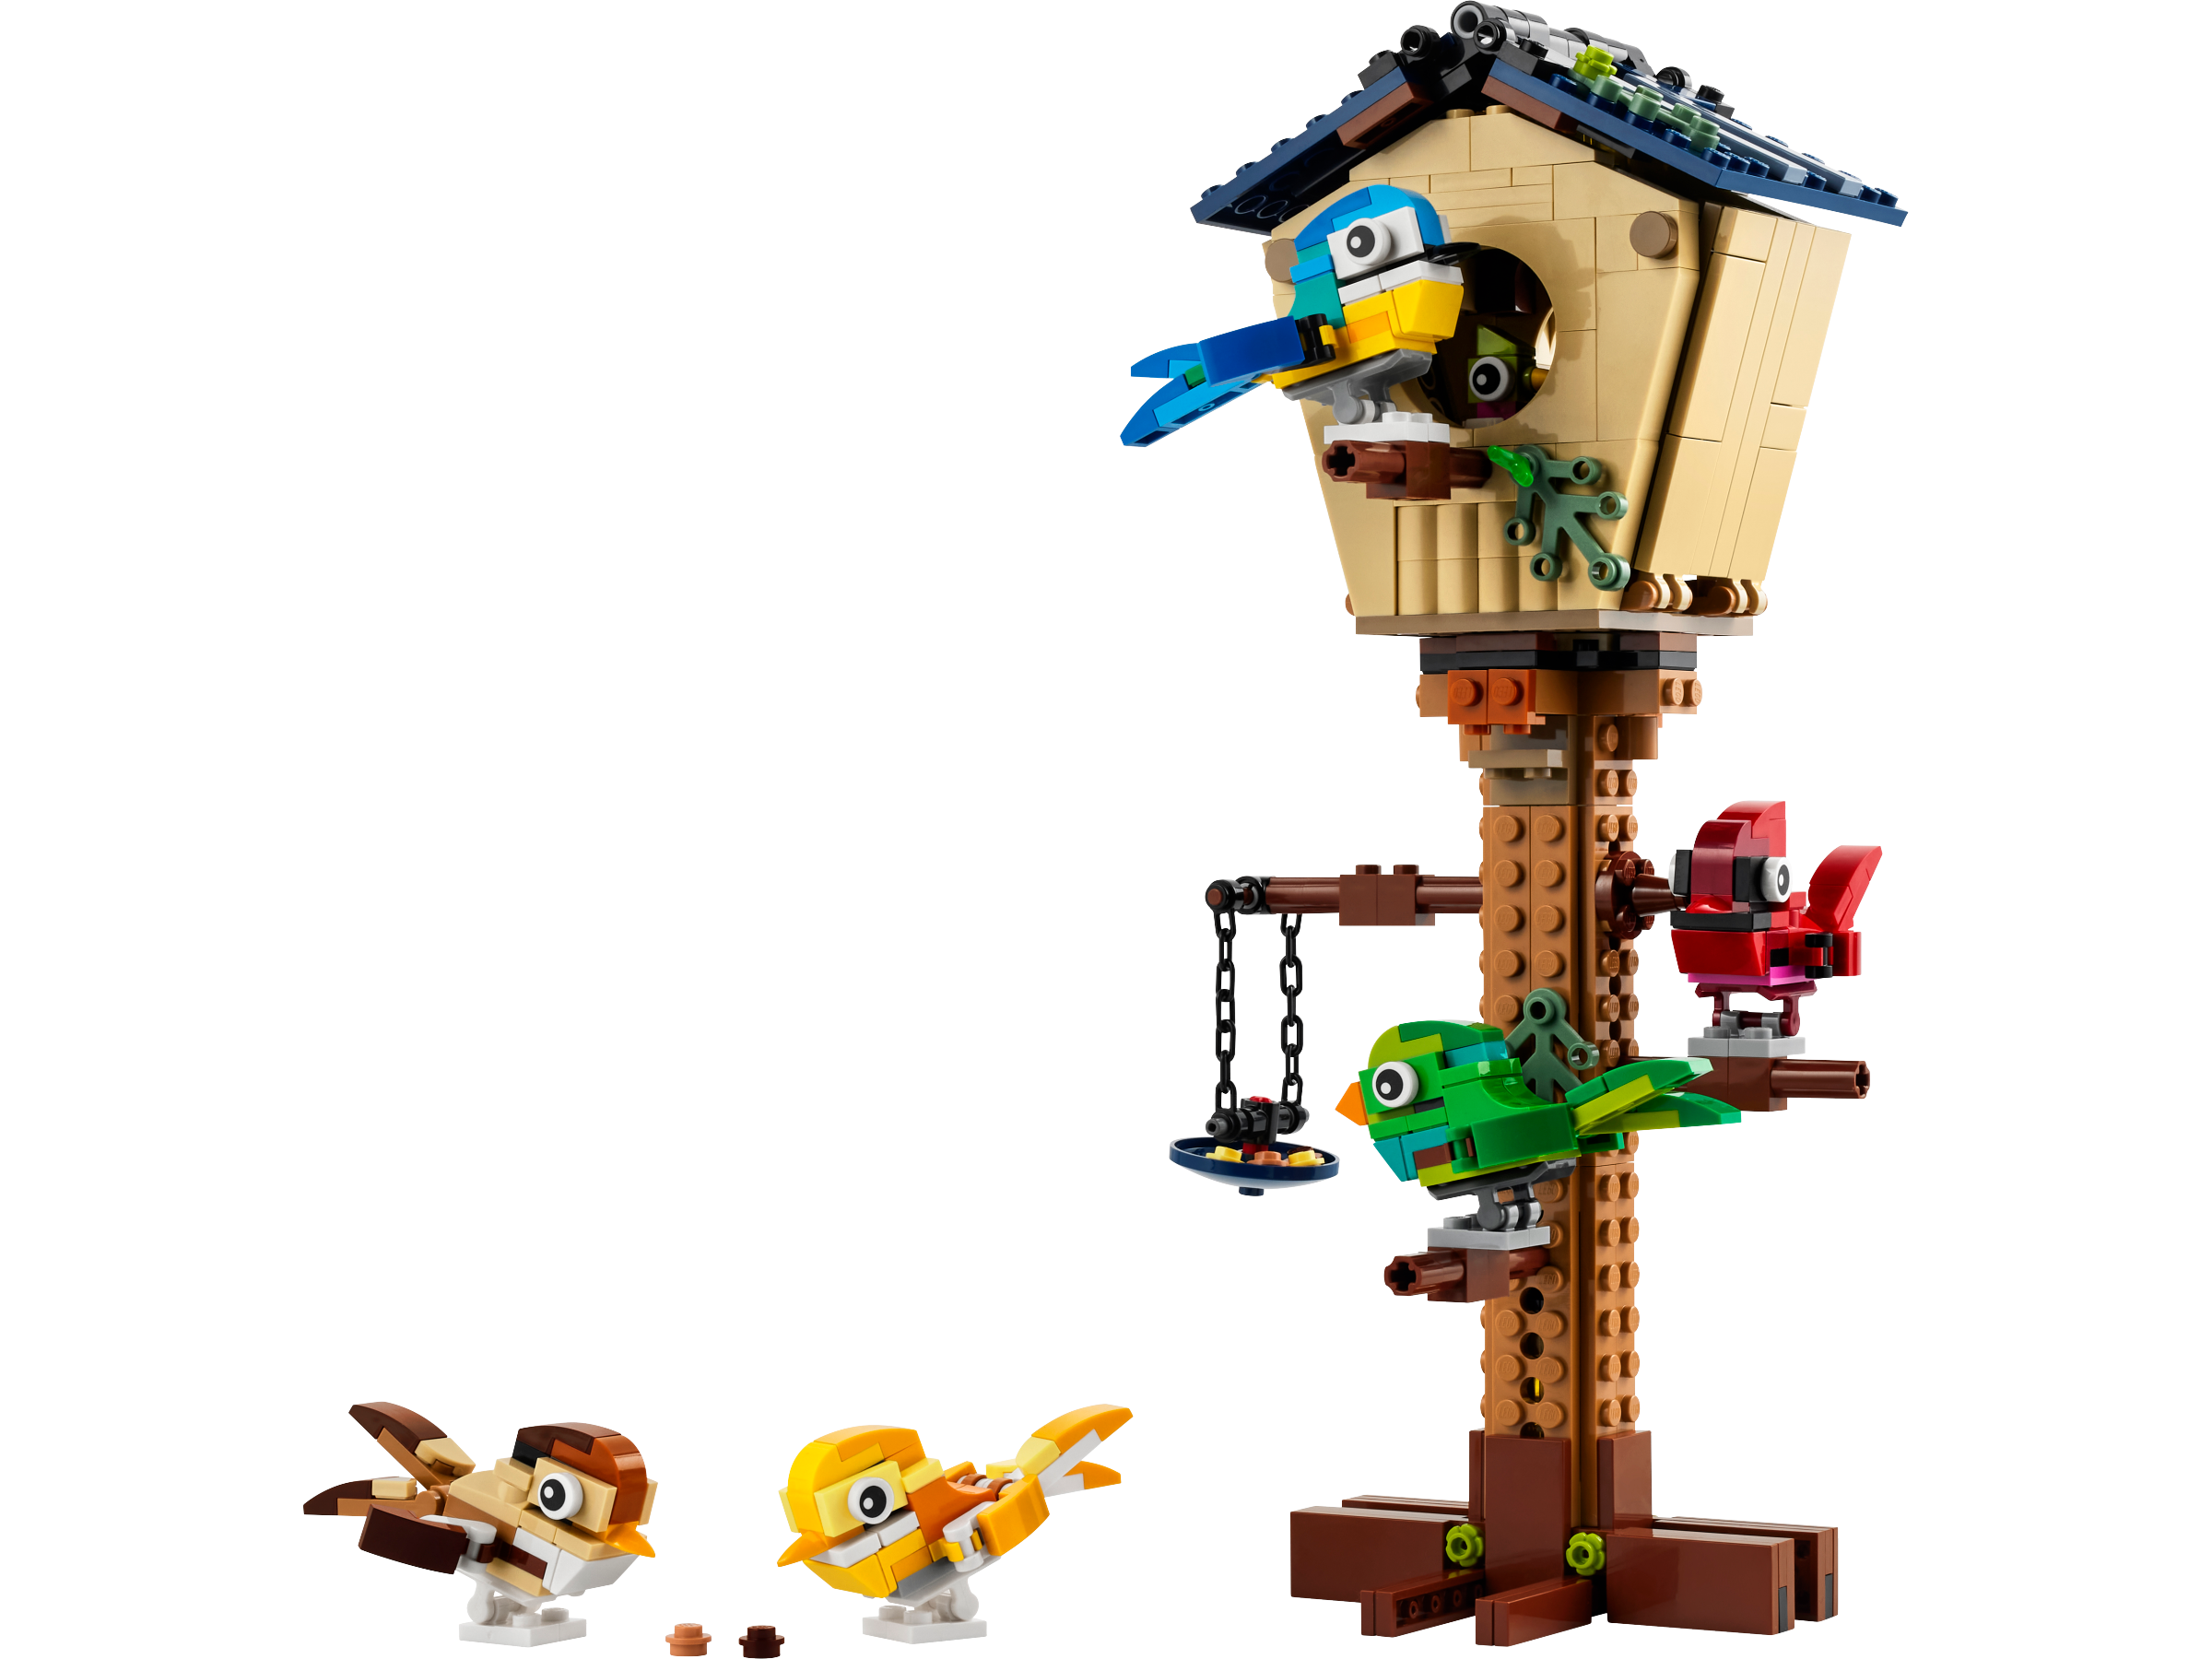 Birdhouse 31143 Creator 3-in-1 | Buy online at the Official LEGO® Shop US